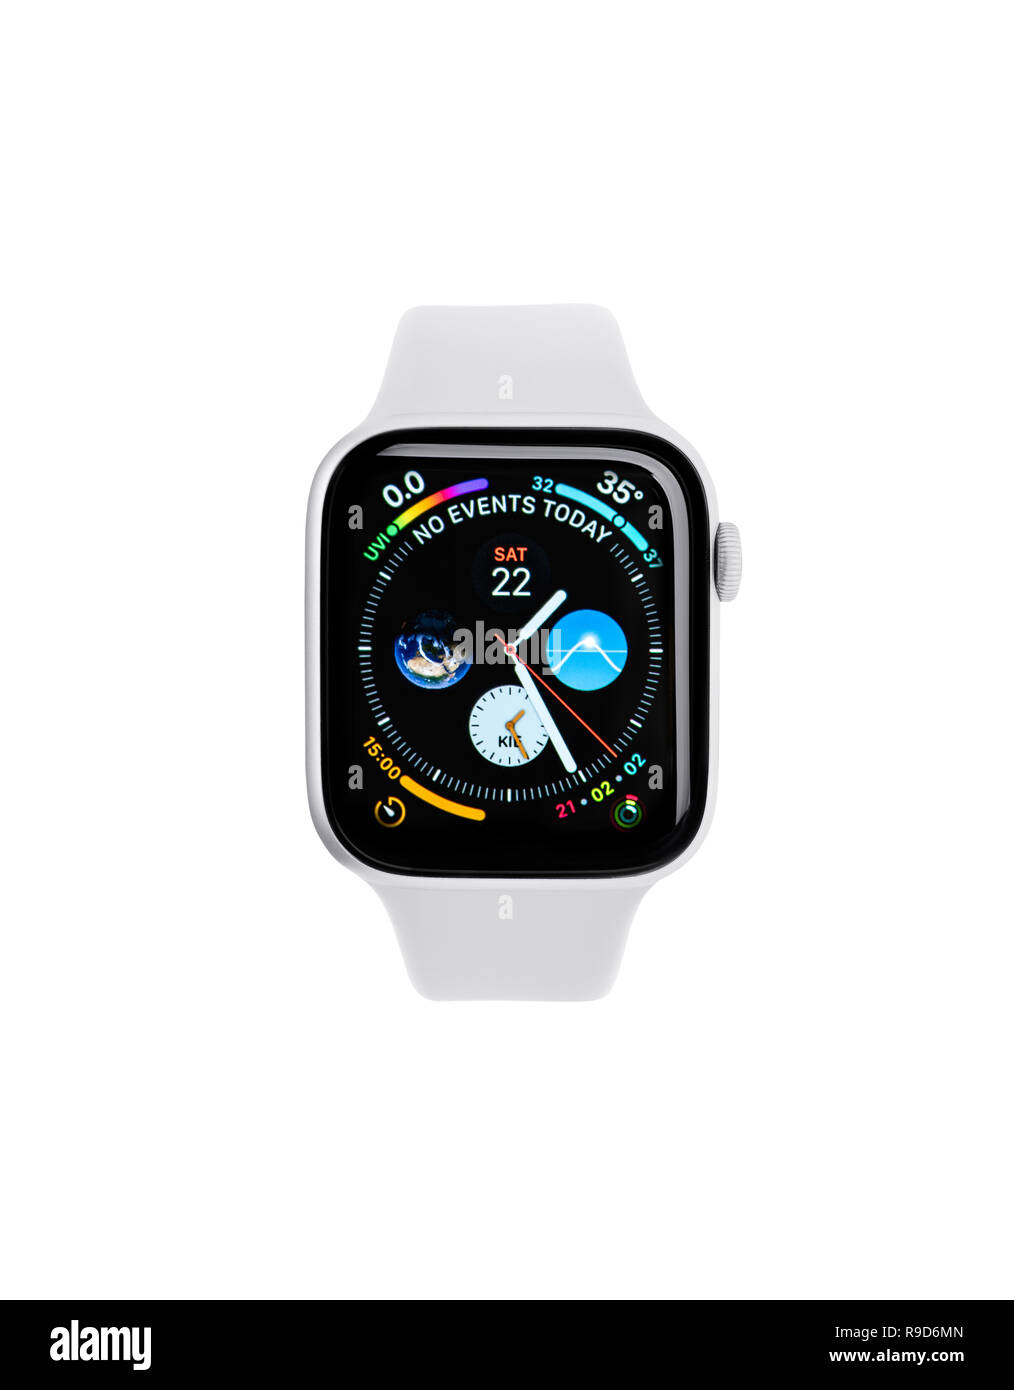 UZHGOROD, UKRAINE - DECEMBER 22, 2018: New Apple Watch 4, 44 inches on a white background. Apple Watch is a line of smartwatches designed, developed,  Stock Photo